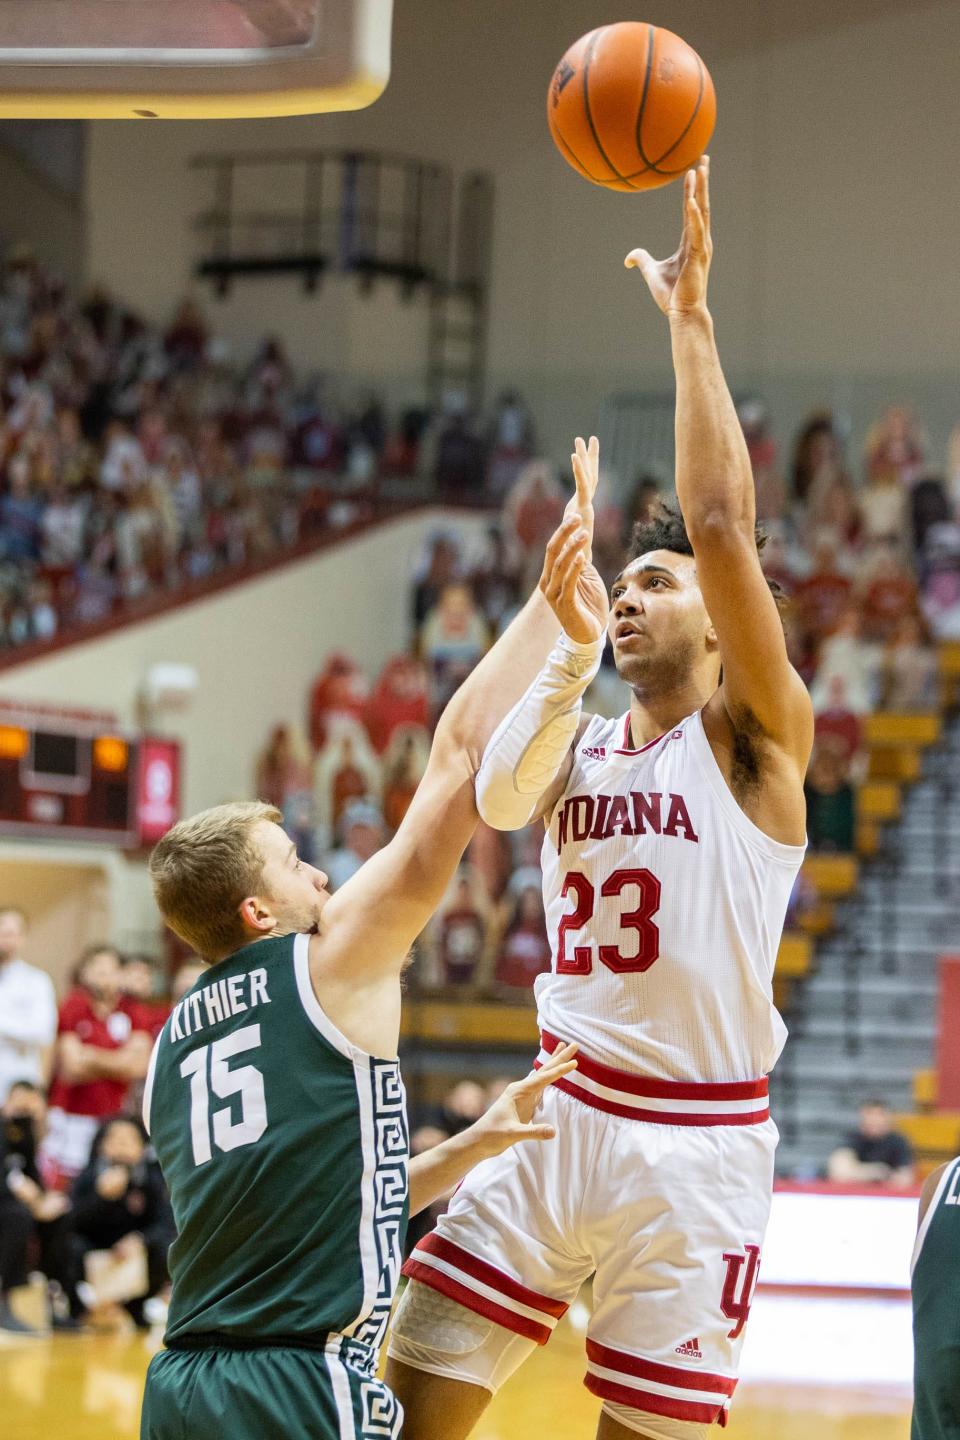 Feb 20, 2021; Bloomington, Indiana, USA; Indiana Hoosiers forward Trayce Jackson-Davis (23) shoots the ball over Michigan State Spartans forward Thomas Kithier (15) in the first half at Simon Skjodt Assembly Hall. Mandatory Credit: Trevor Ruszkowski-USA TODAY Sports